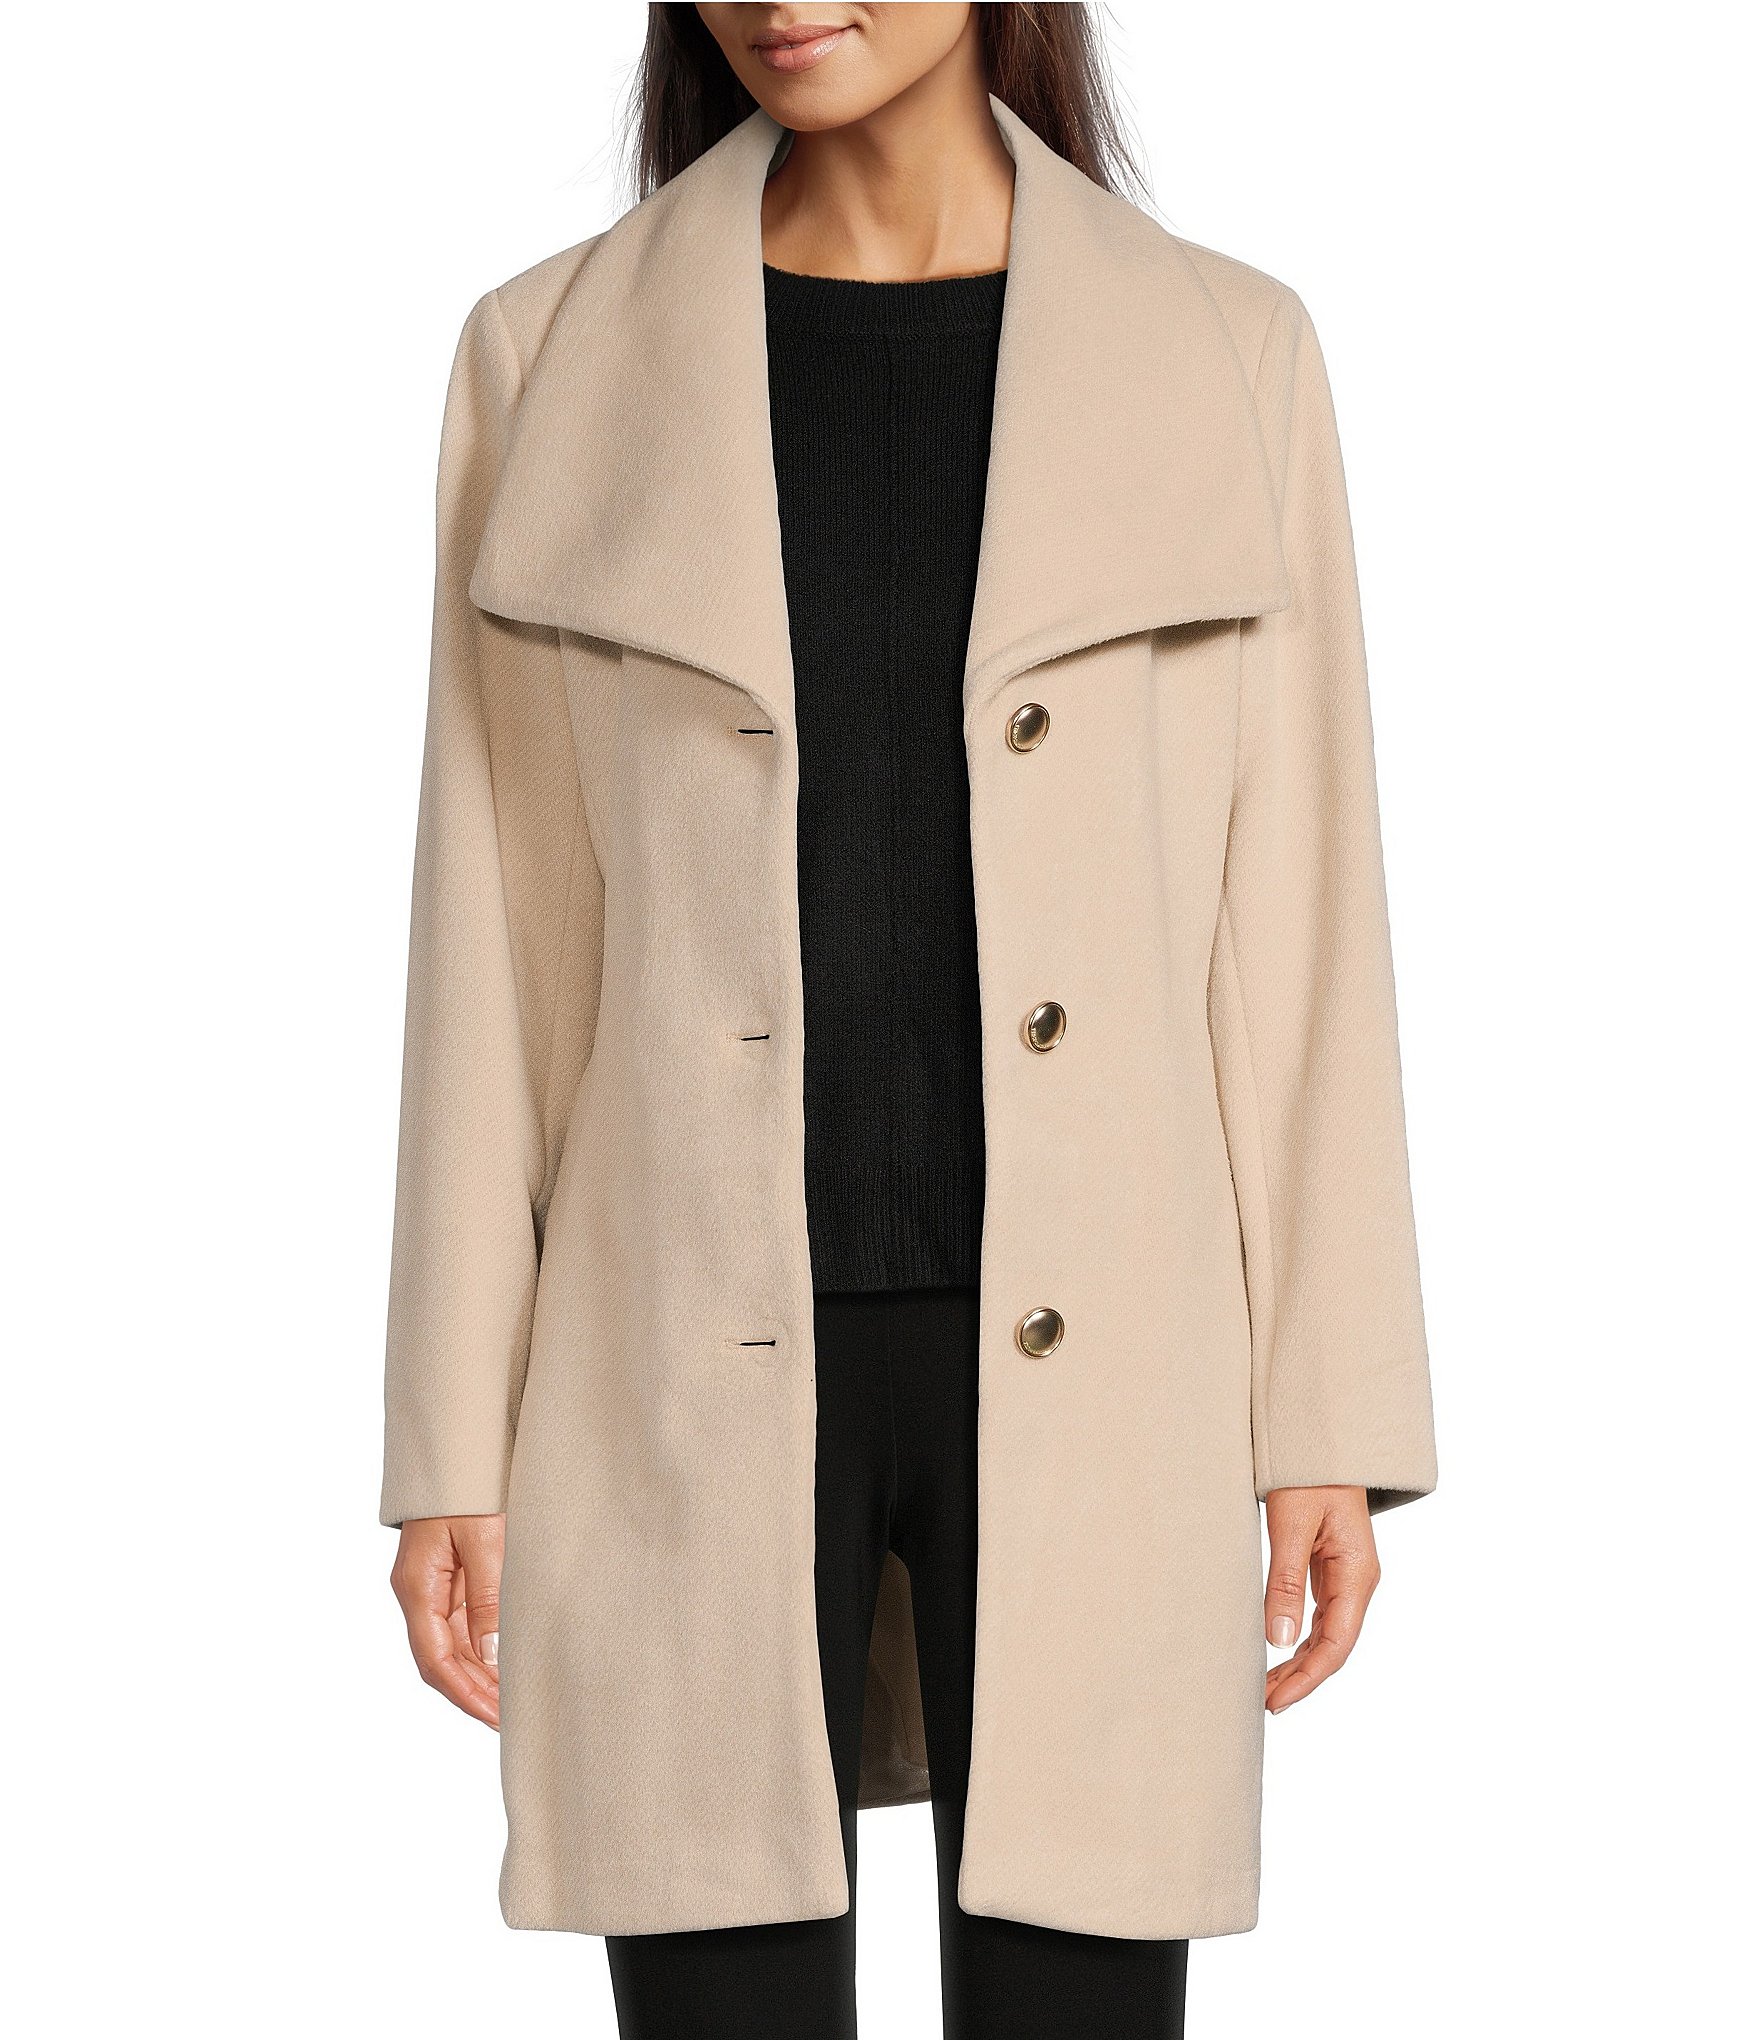 Vince Camuto Winged Collar Belted Wrap Front Coat | Dillard's